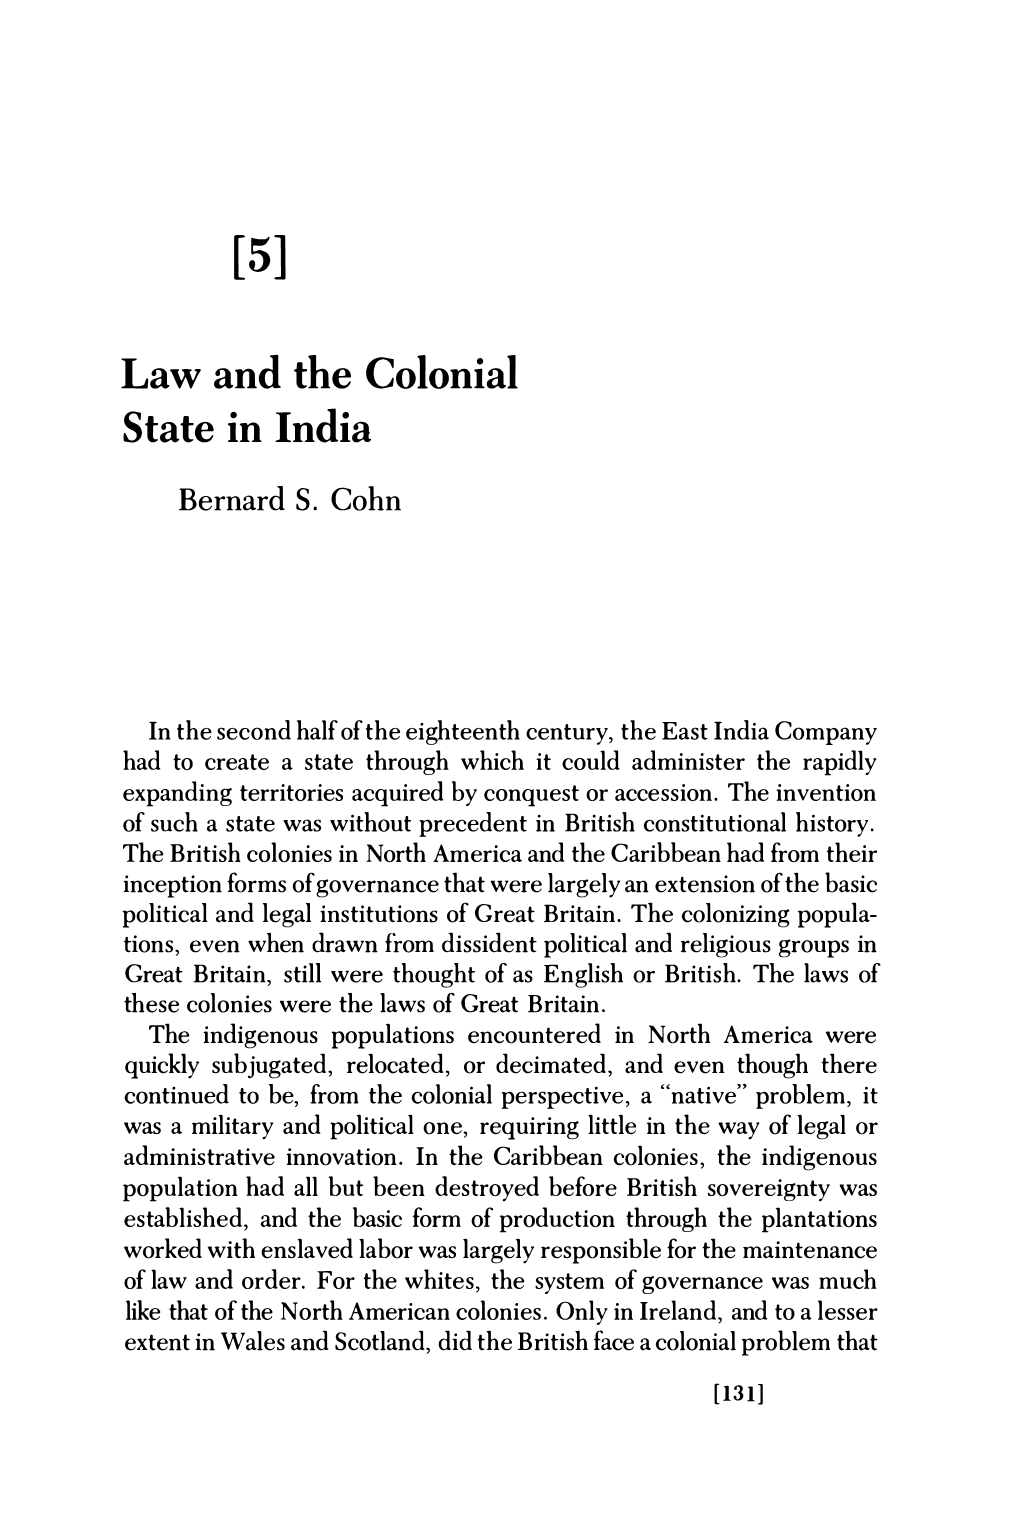 Law and the Colonial State in India